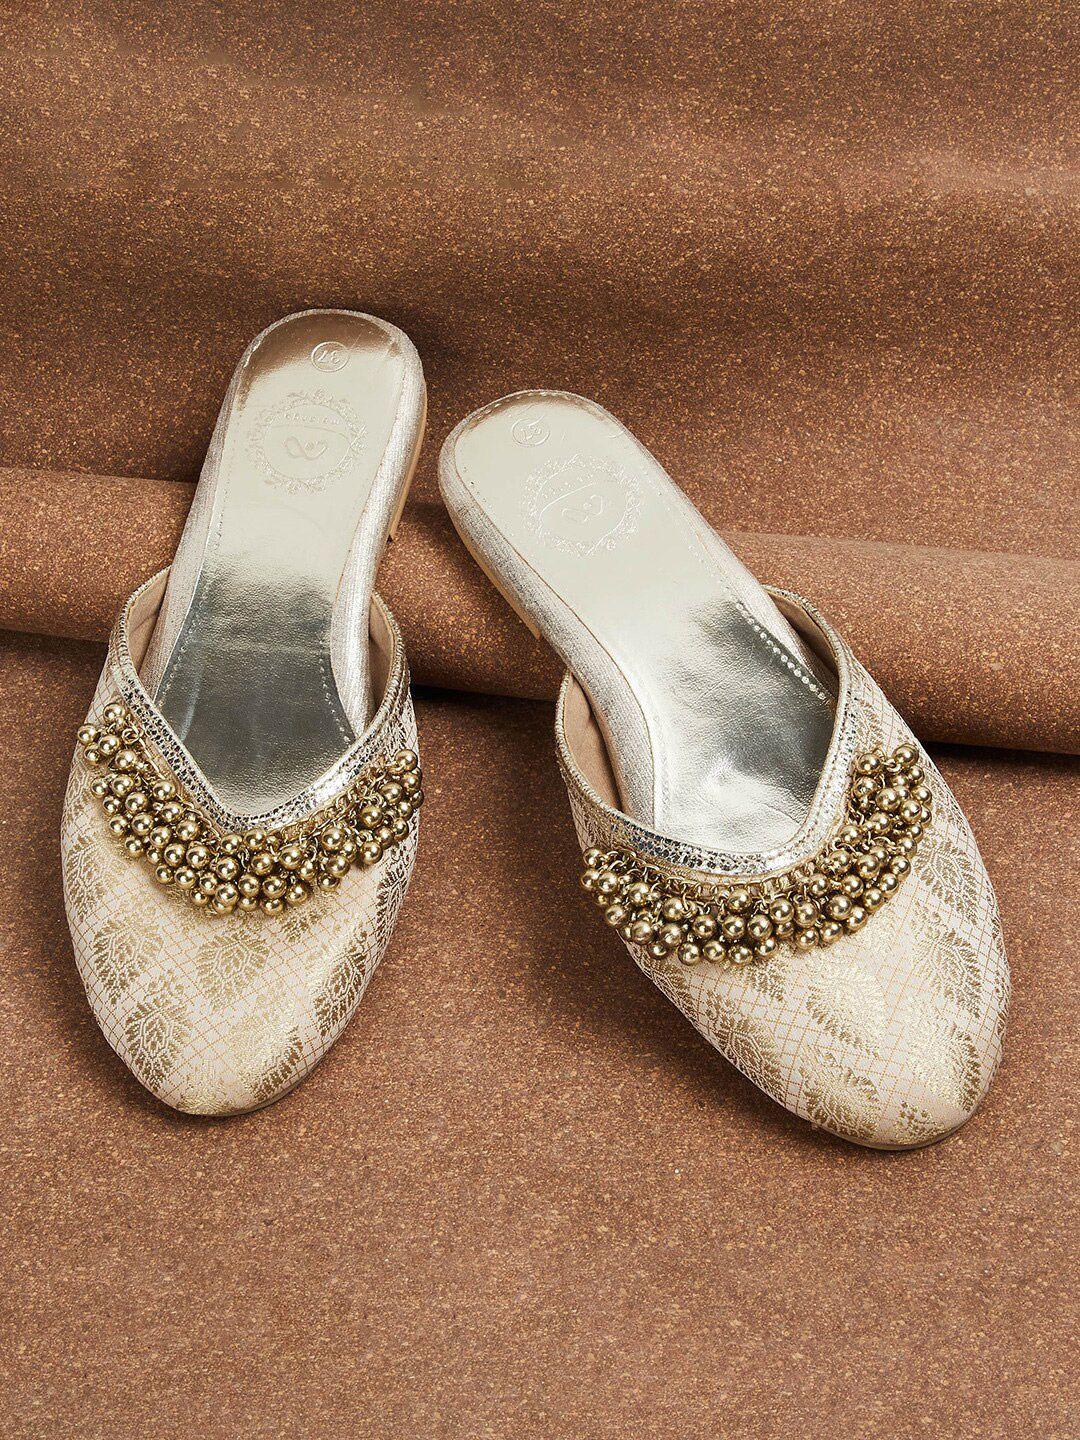 melange-by-lifestyle-women-gold-toned-textured-pu-espadrilles